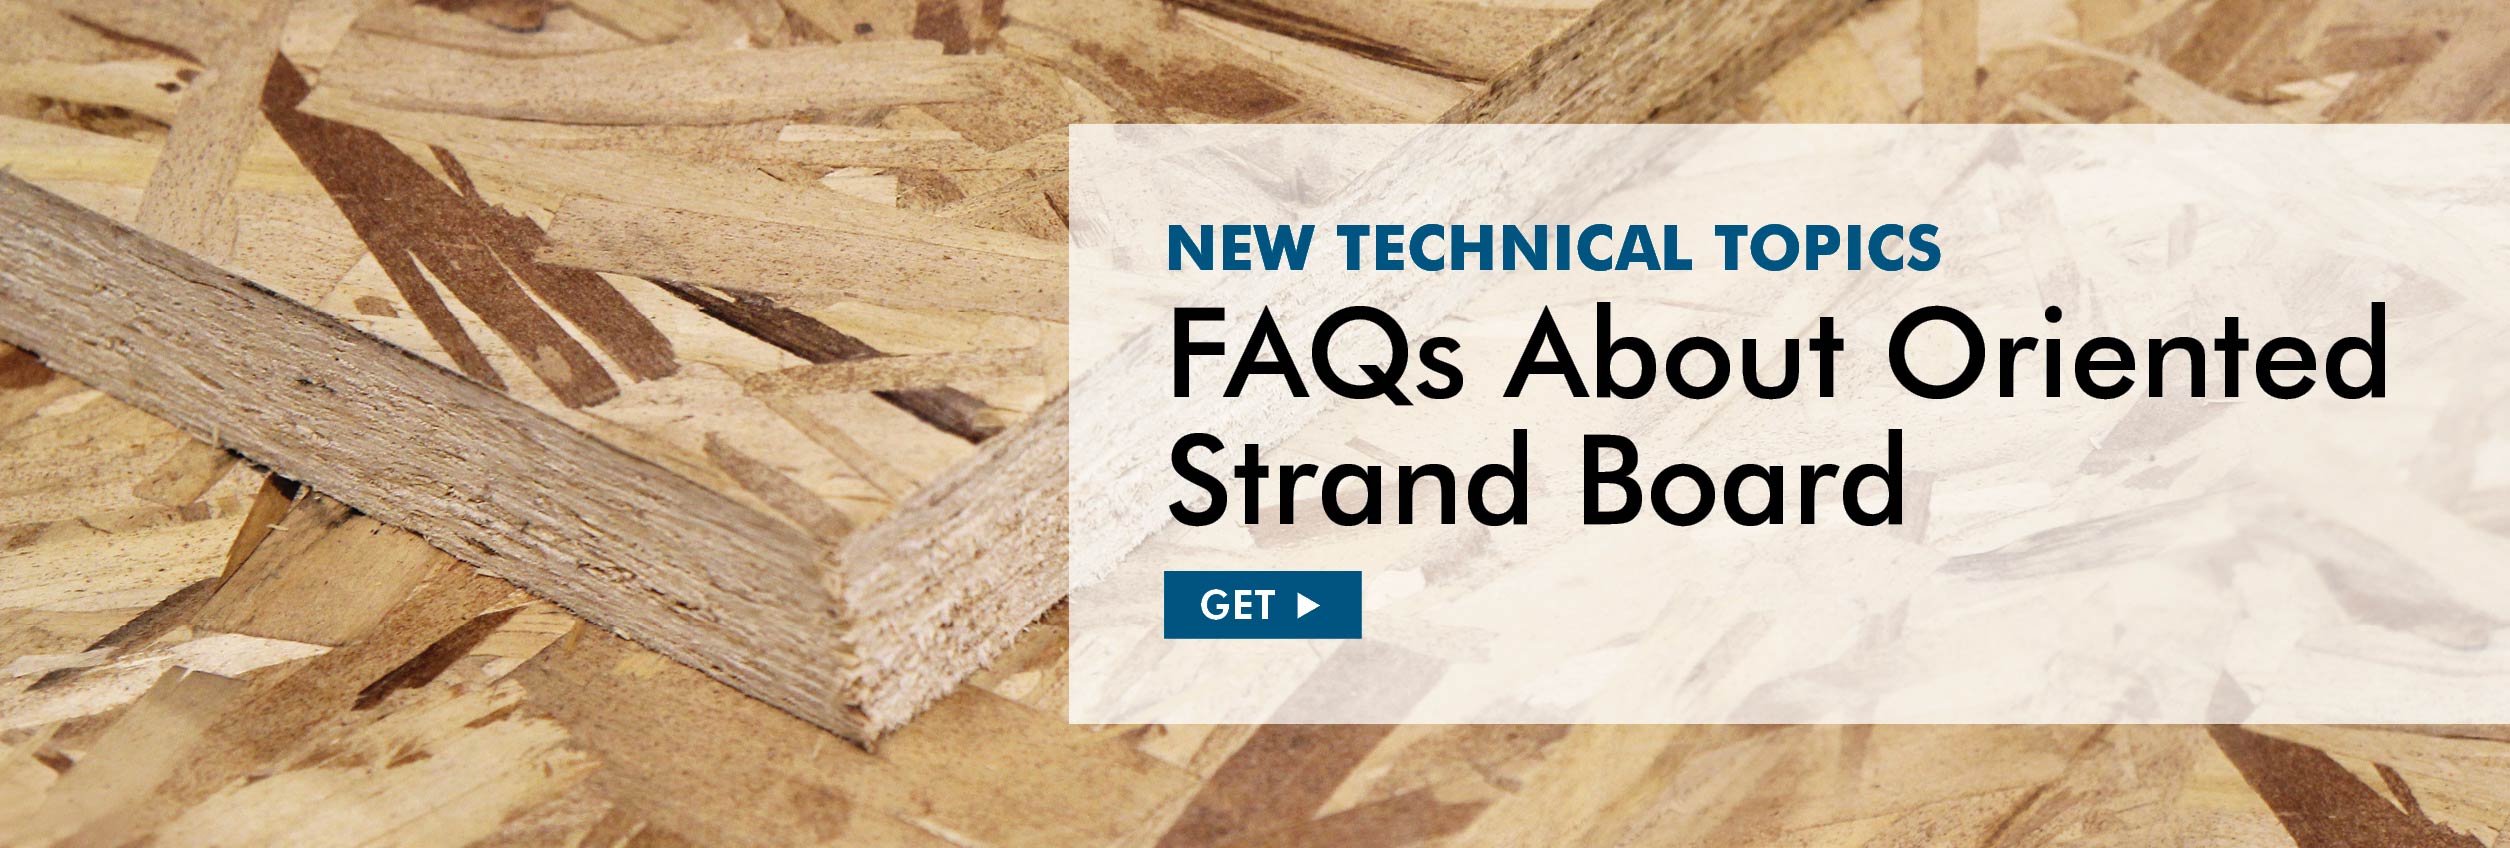 Technical Topic: FAQs About Oriented Strand Board